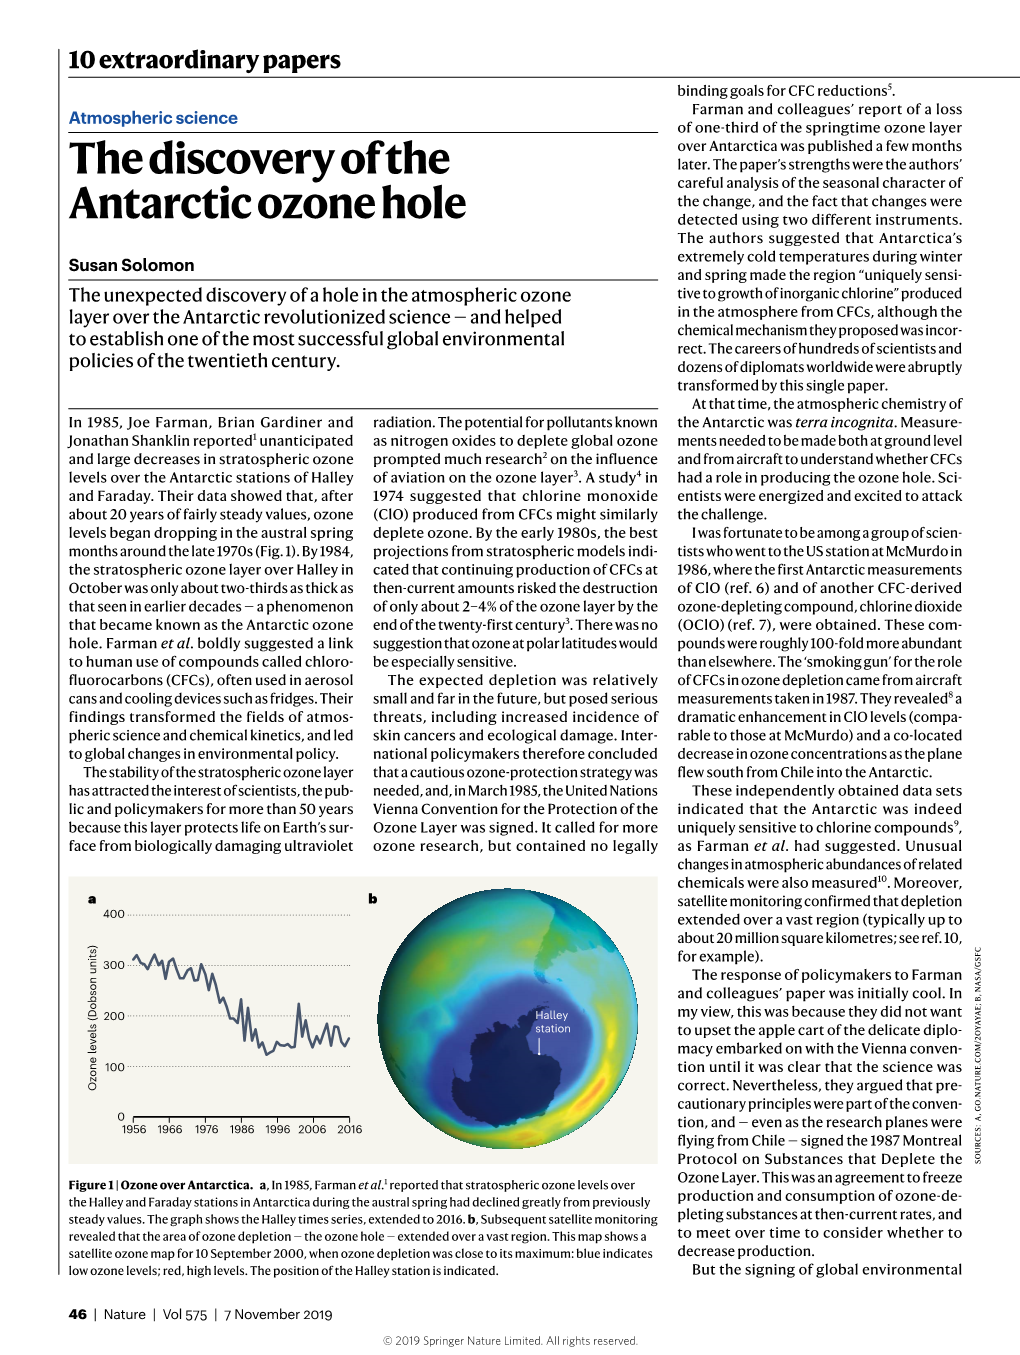 The Discovery of the Antarctic Ozone Hole